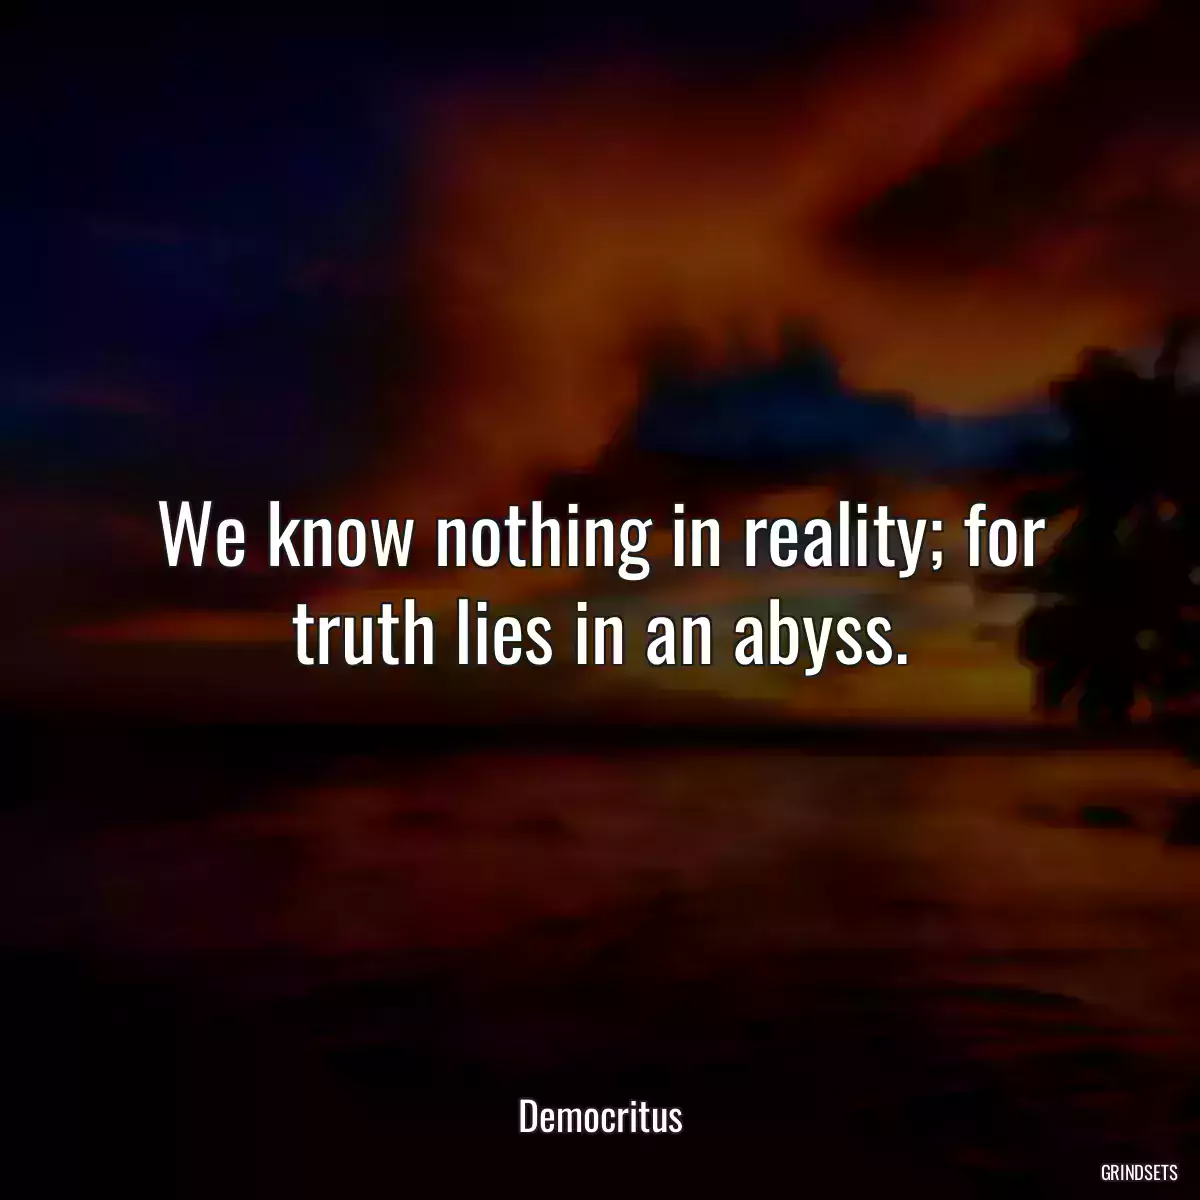 We know nothing in reality; for truth lies in an abyss.